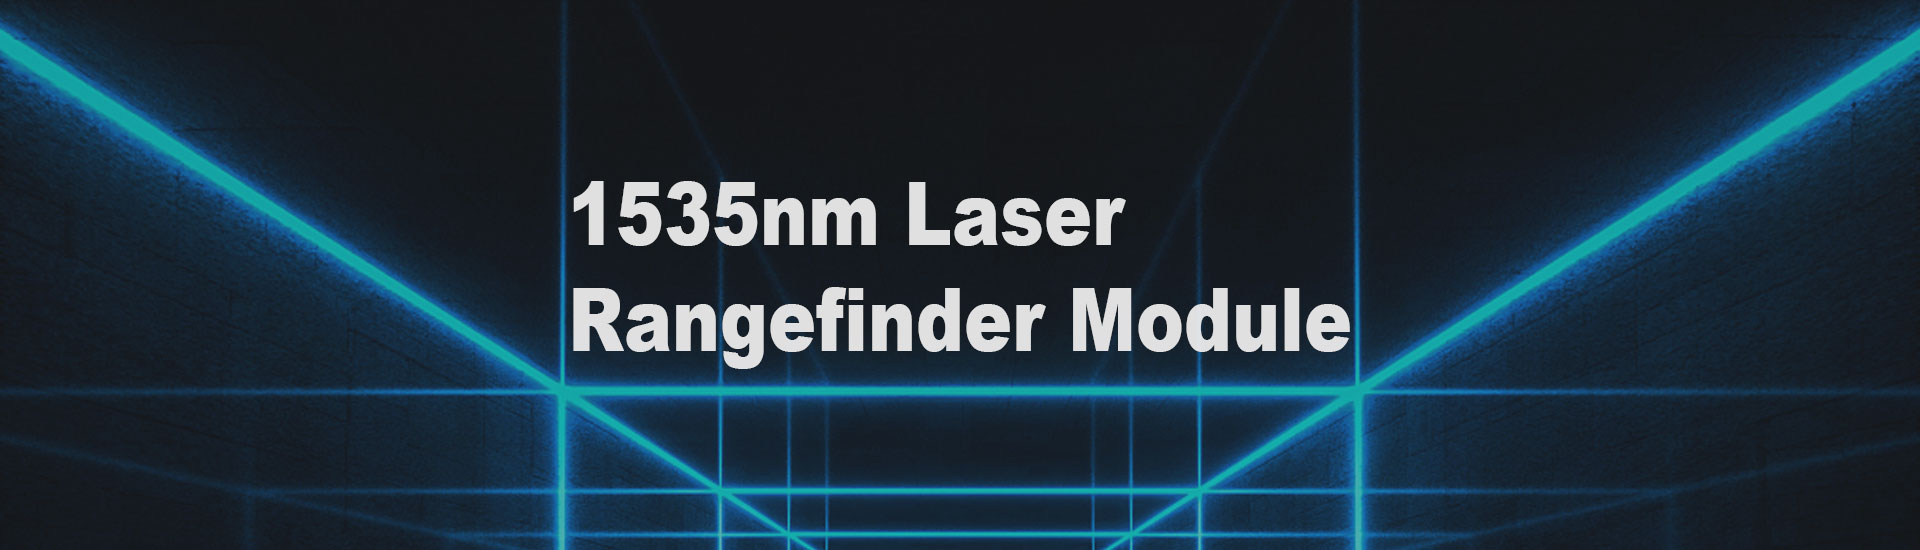 1535nm-er-glass-lasers